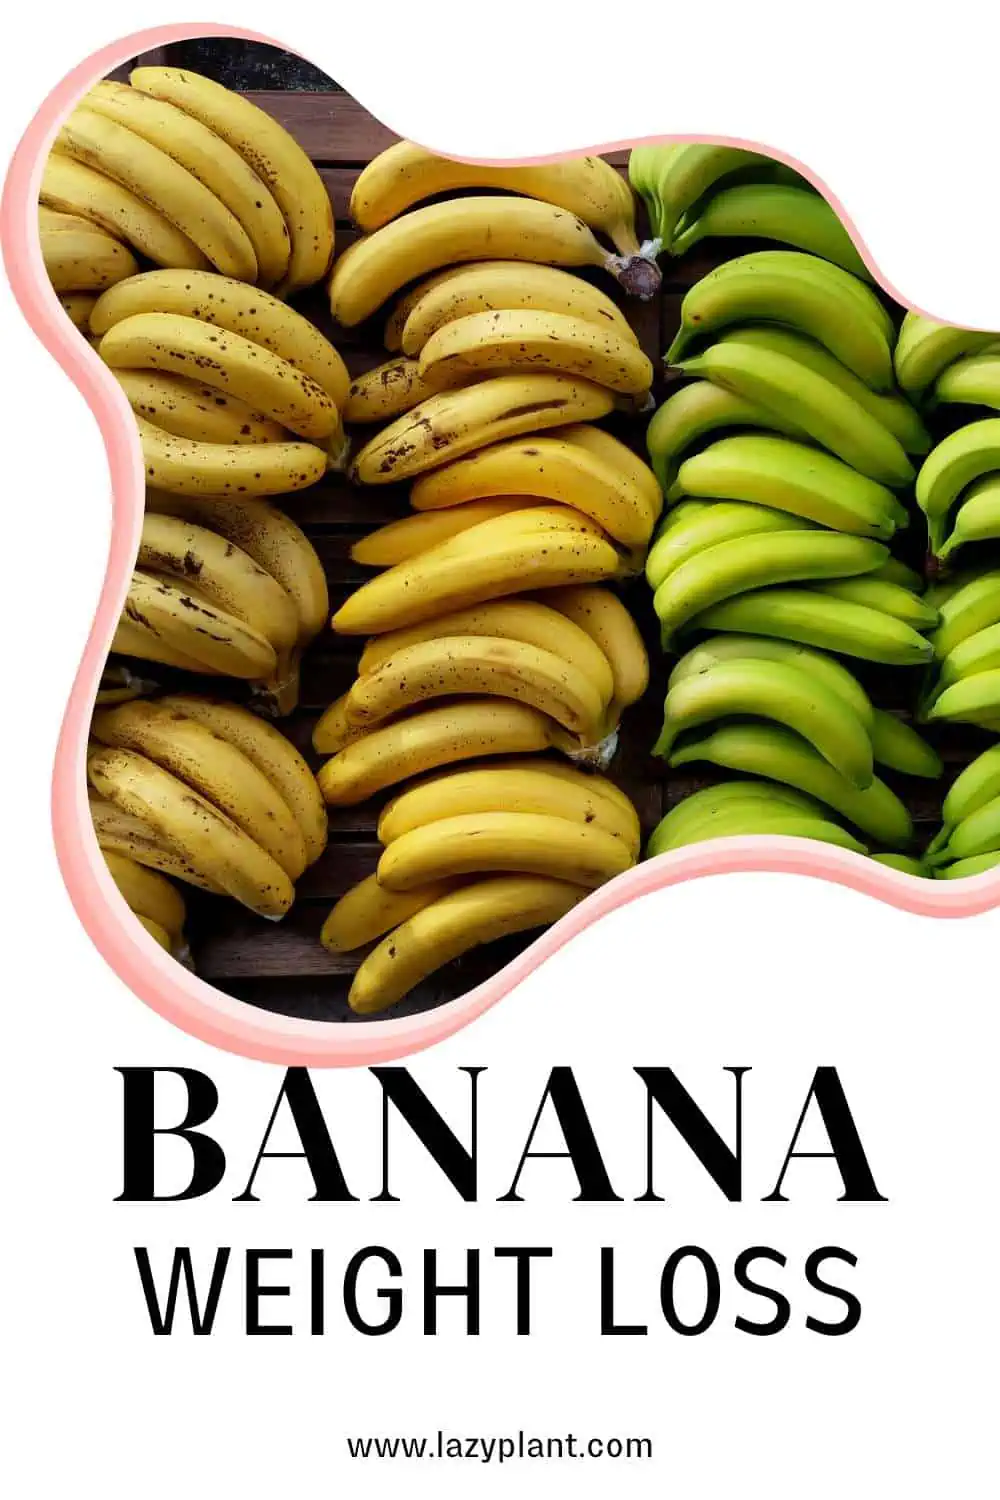 Green or Ripe bananas for Weight Loss?